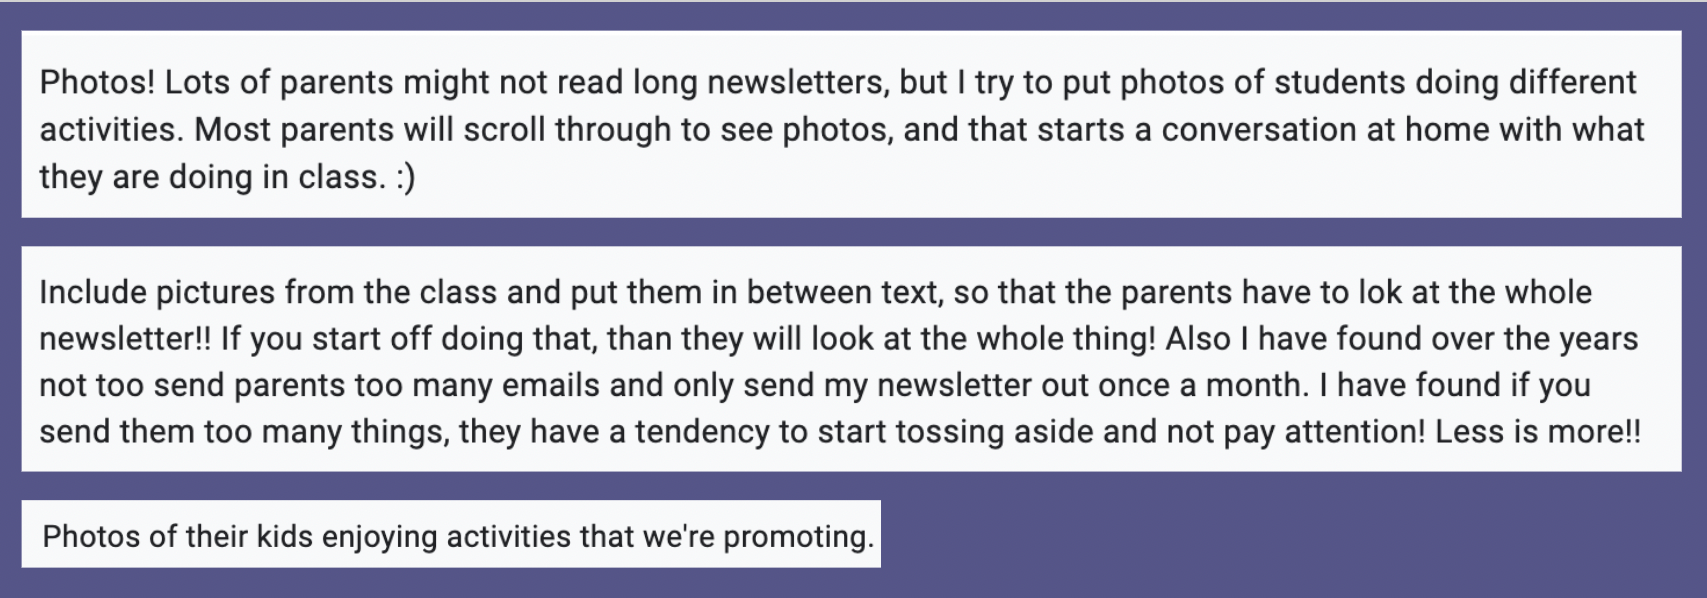 screenshot of typed suggestions from principals for how to use photos in newsletters